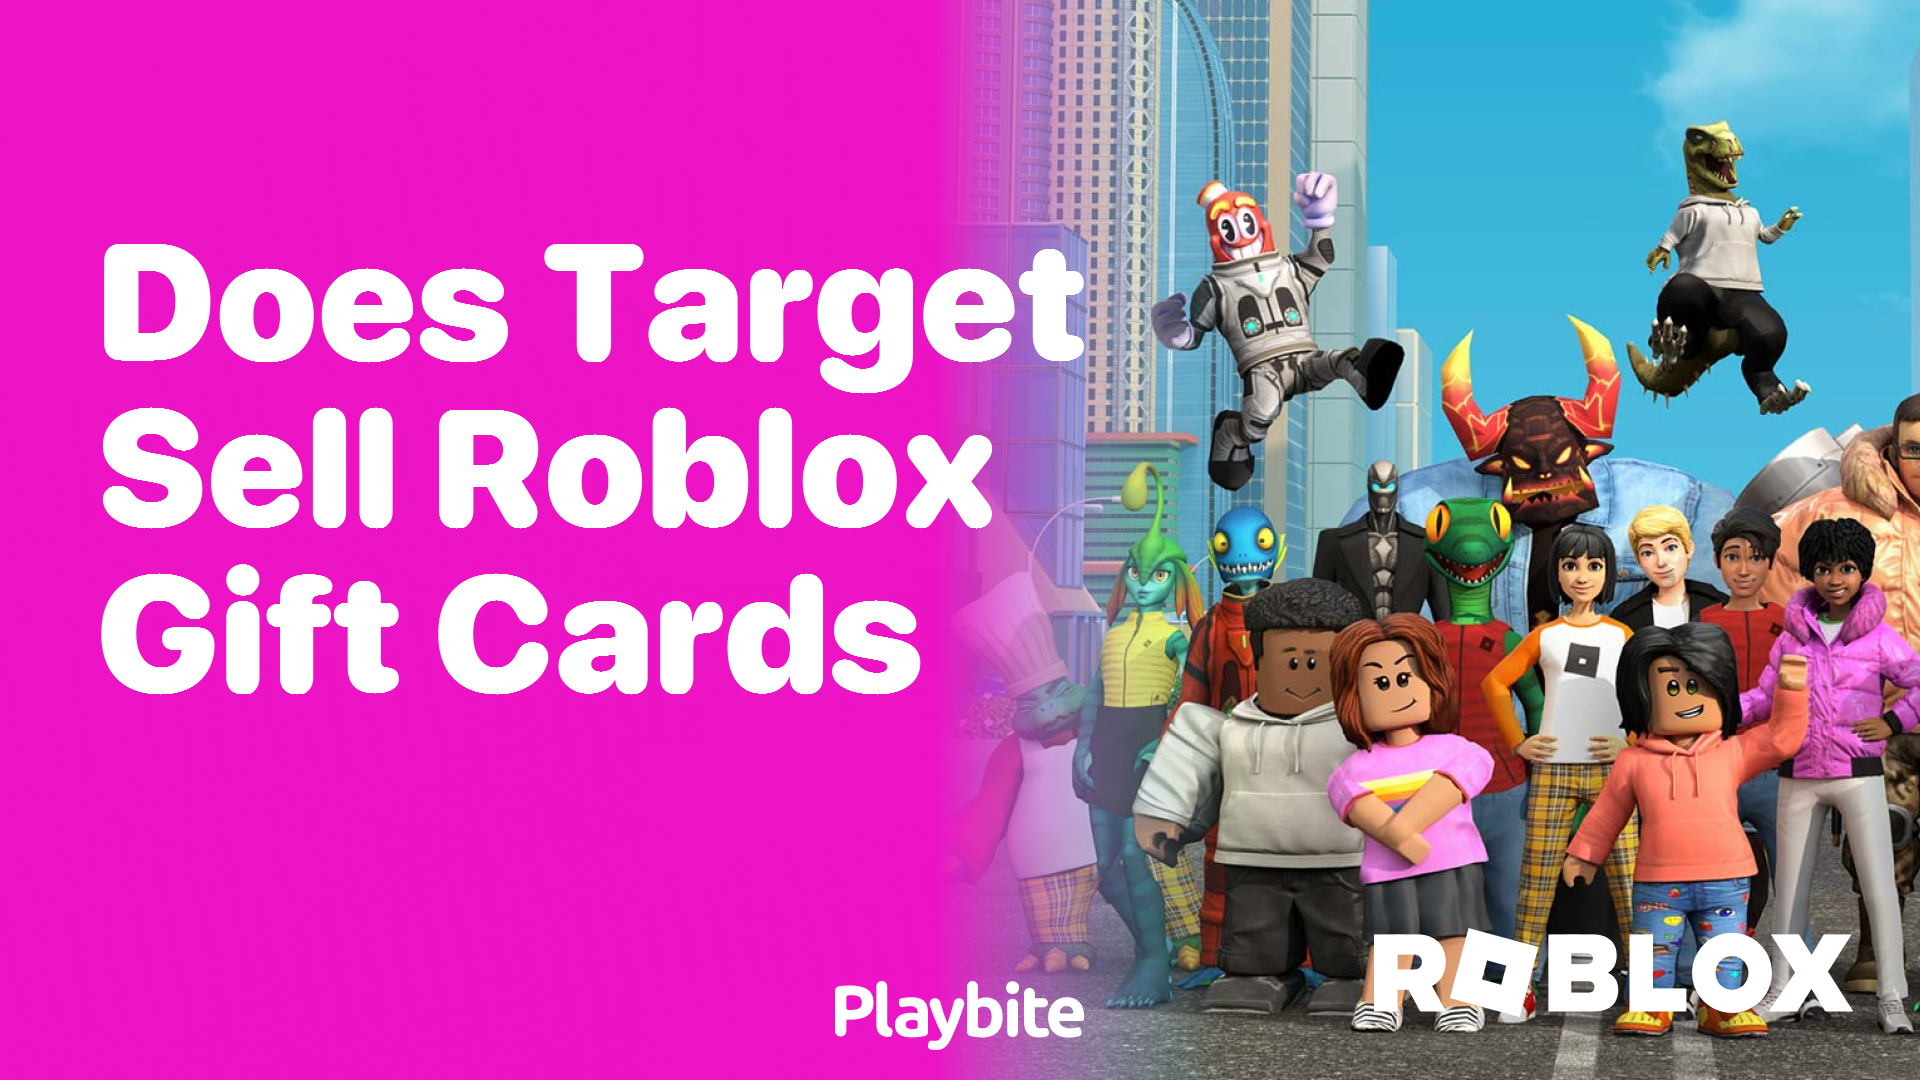 Does Target Sell Roblox Gift Cards?